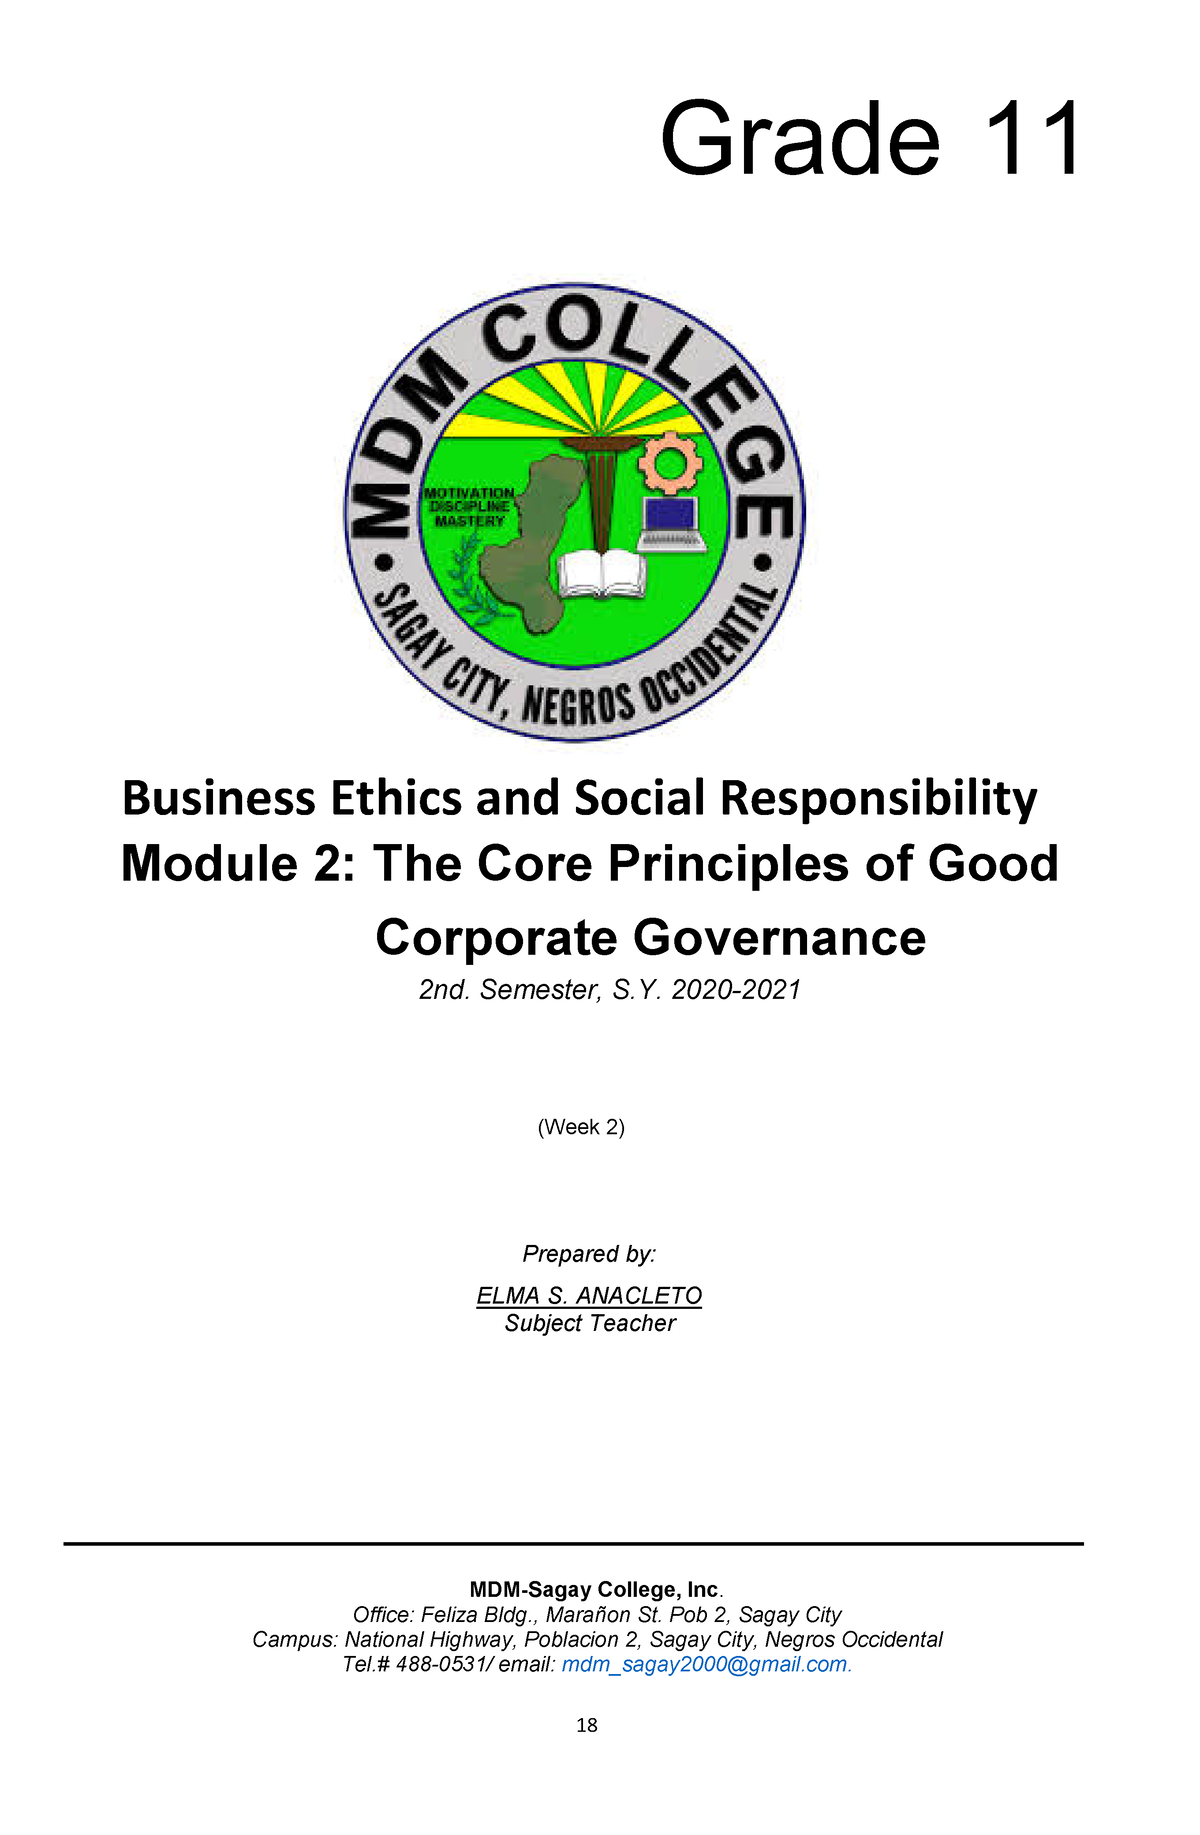 chapter 2 assignment ethics and social responsibility in business